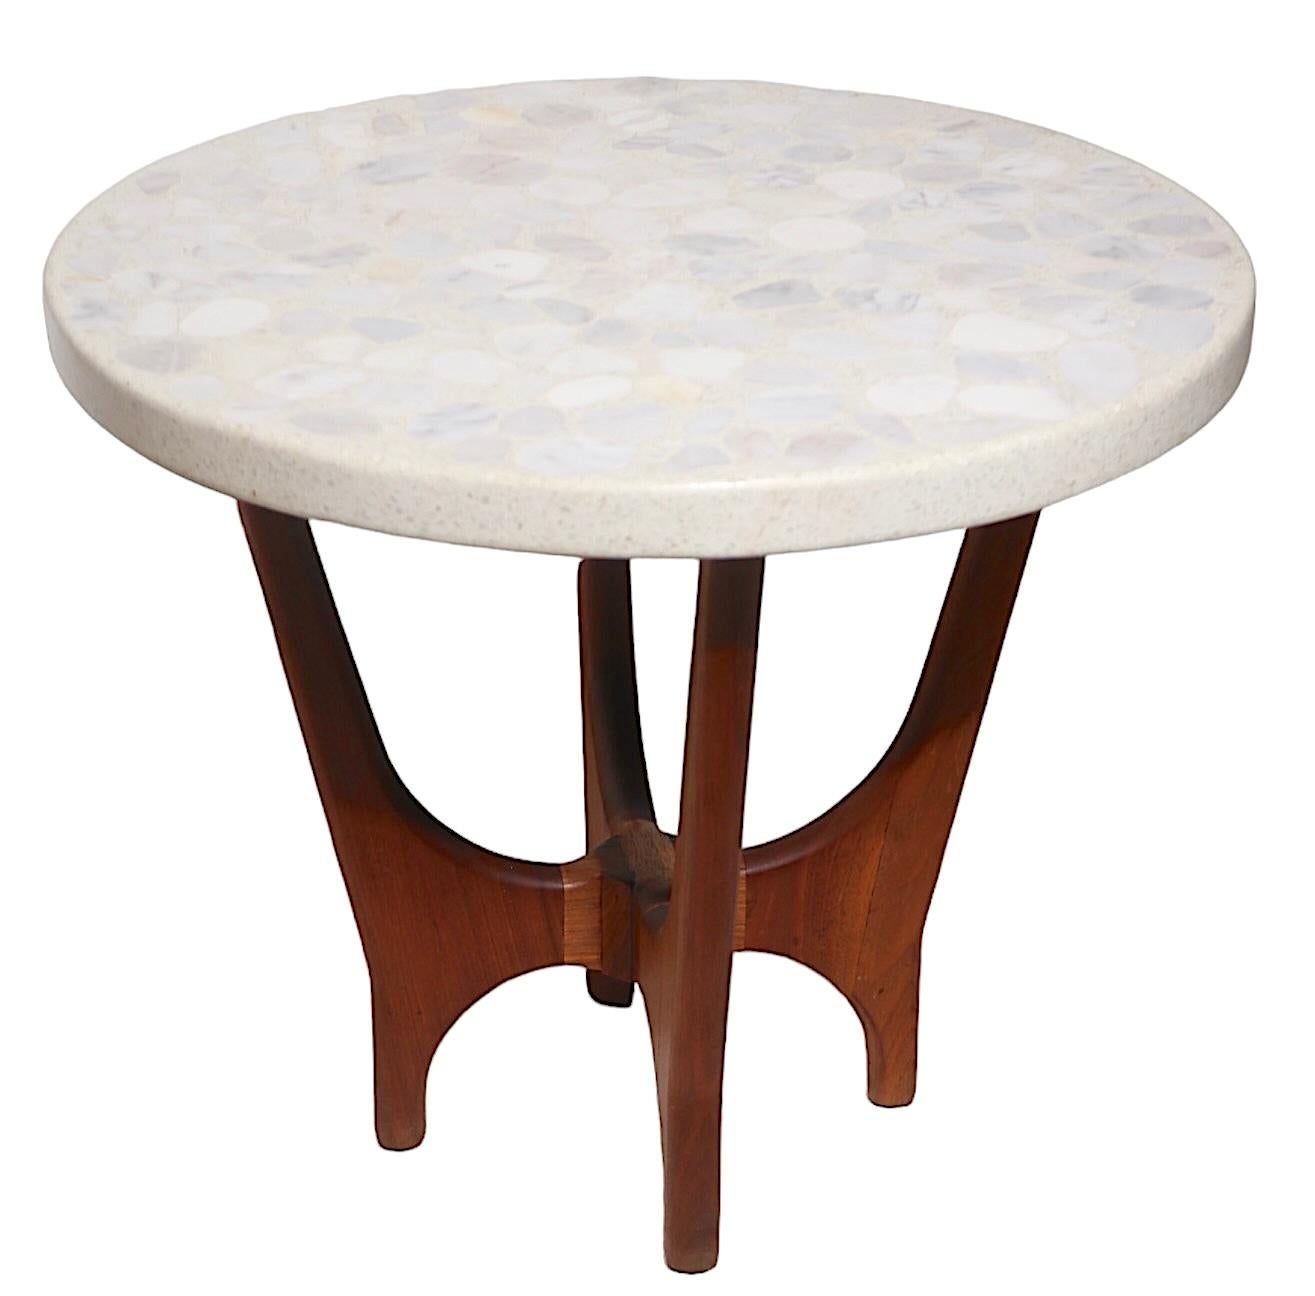 Chic Mid Century side, or end table designed by Harvey Probber circa 1960's. The table features a thick ( 1.75 inch ) round top composed of marble, onyx, and terrazzo, with a stylized  sculptural solid walnut base. This example is in very fine,